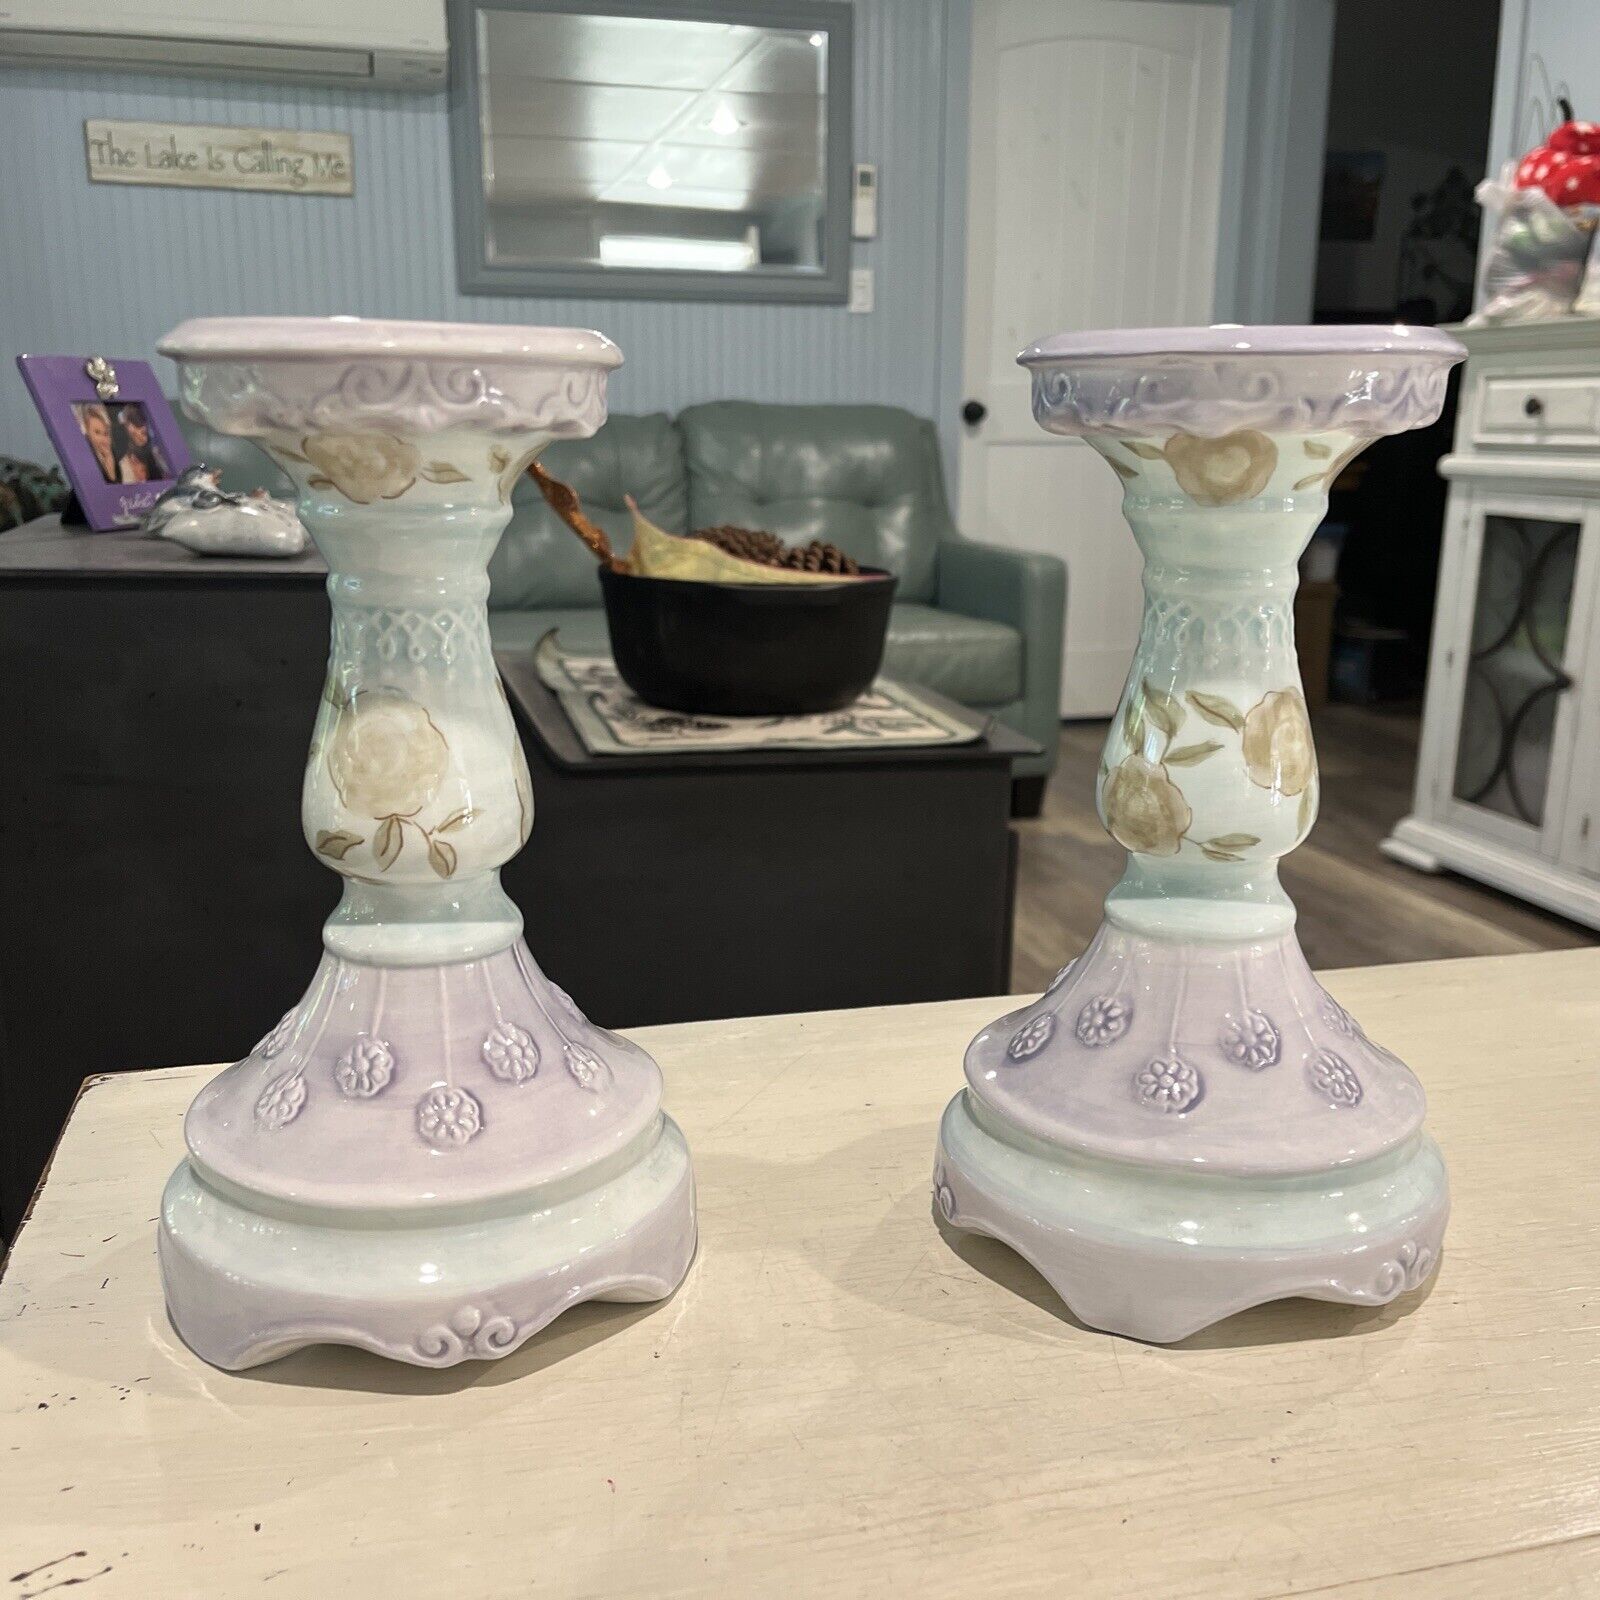 ONE PAIR Tracy Porter Handpainted Ceramic Candle stick holders￼ Prairie 9” ￼￼